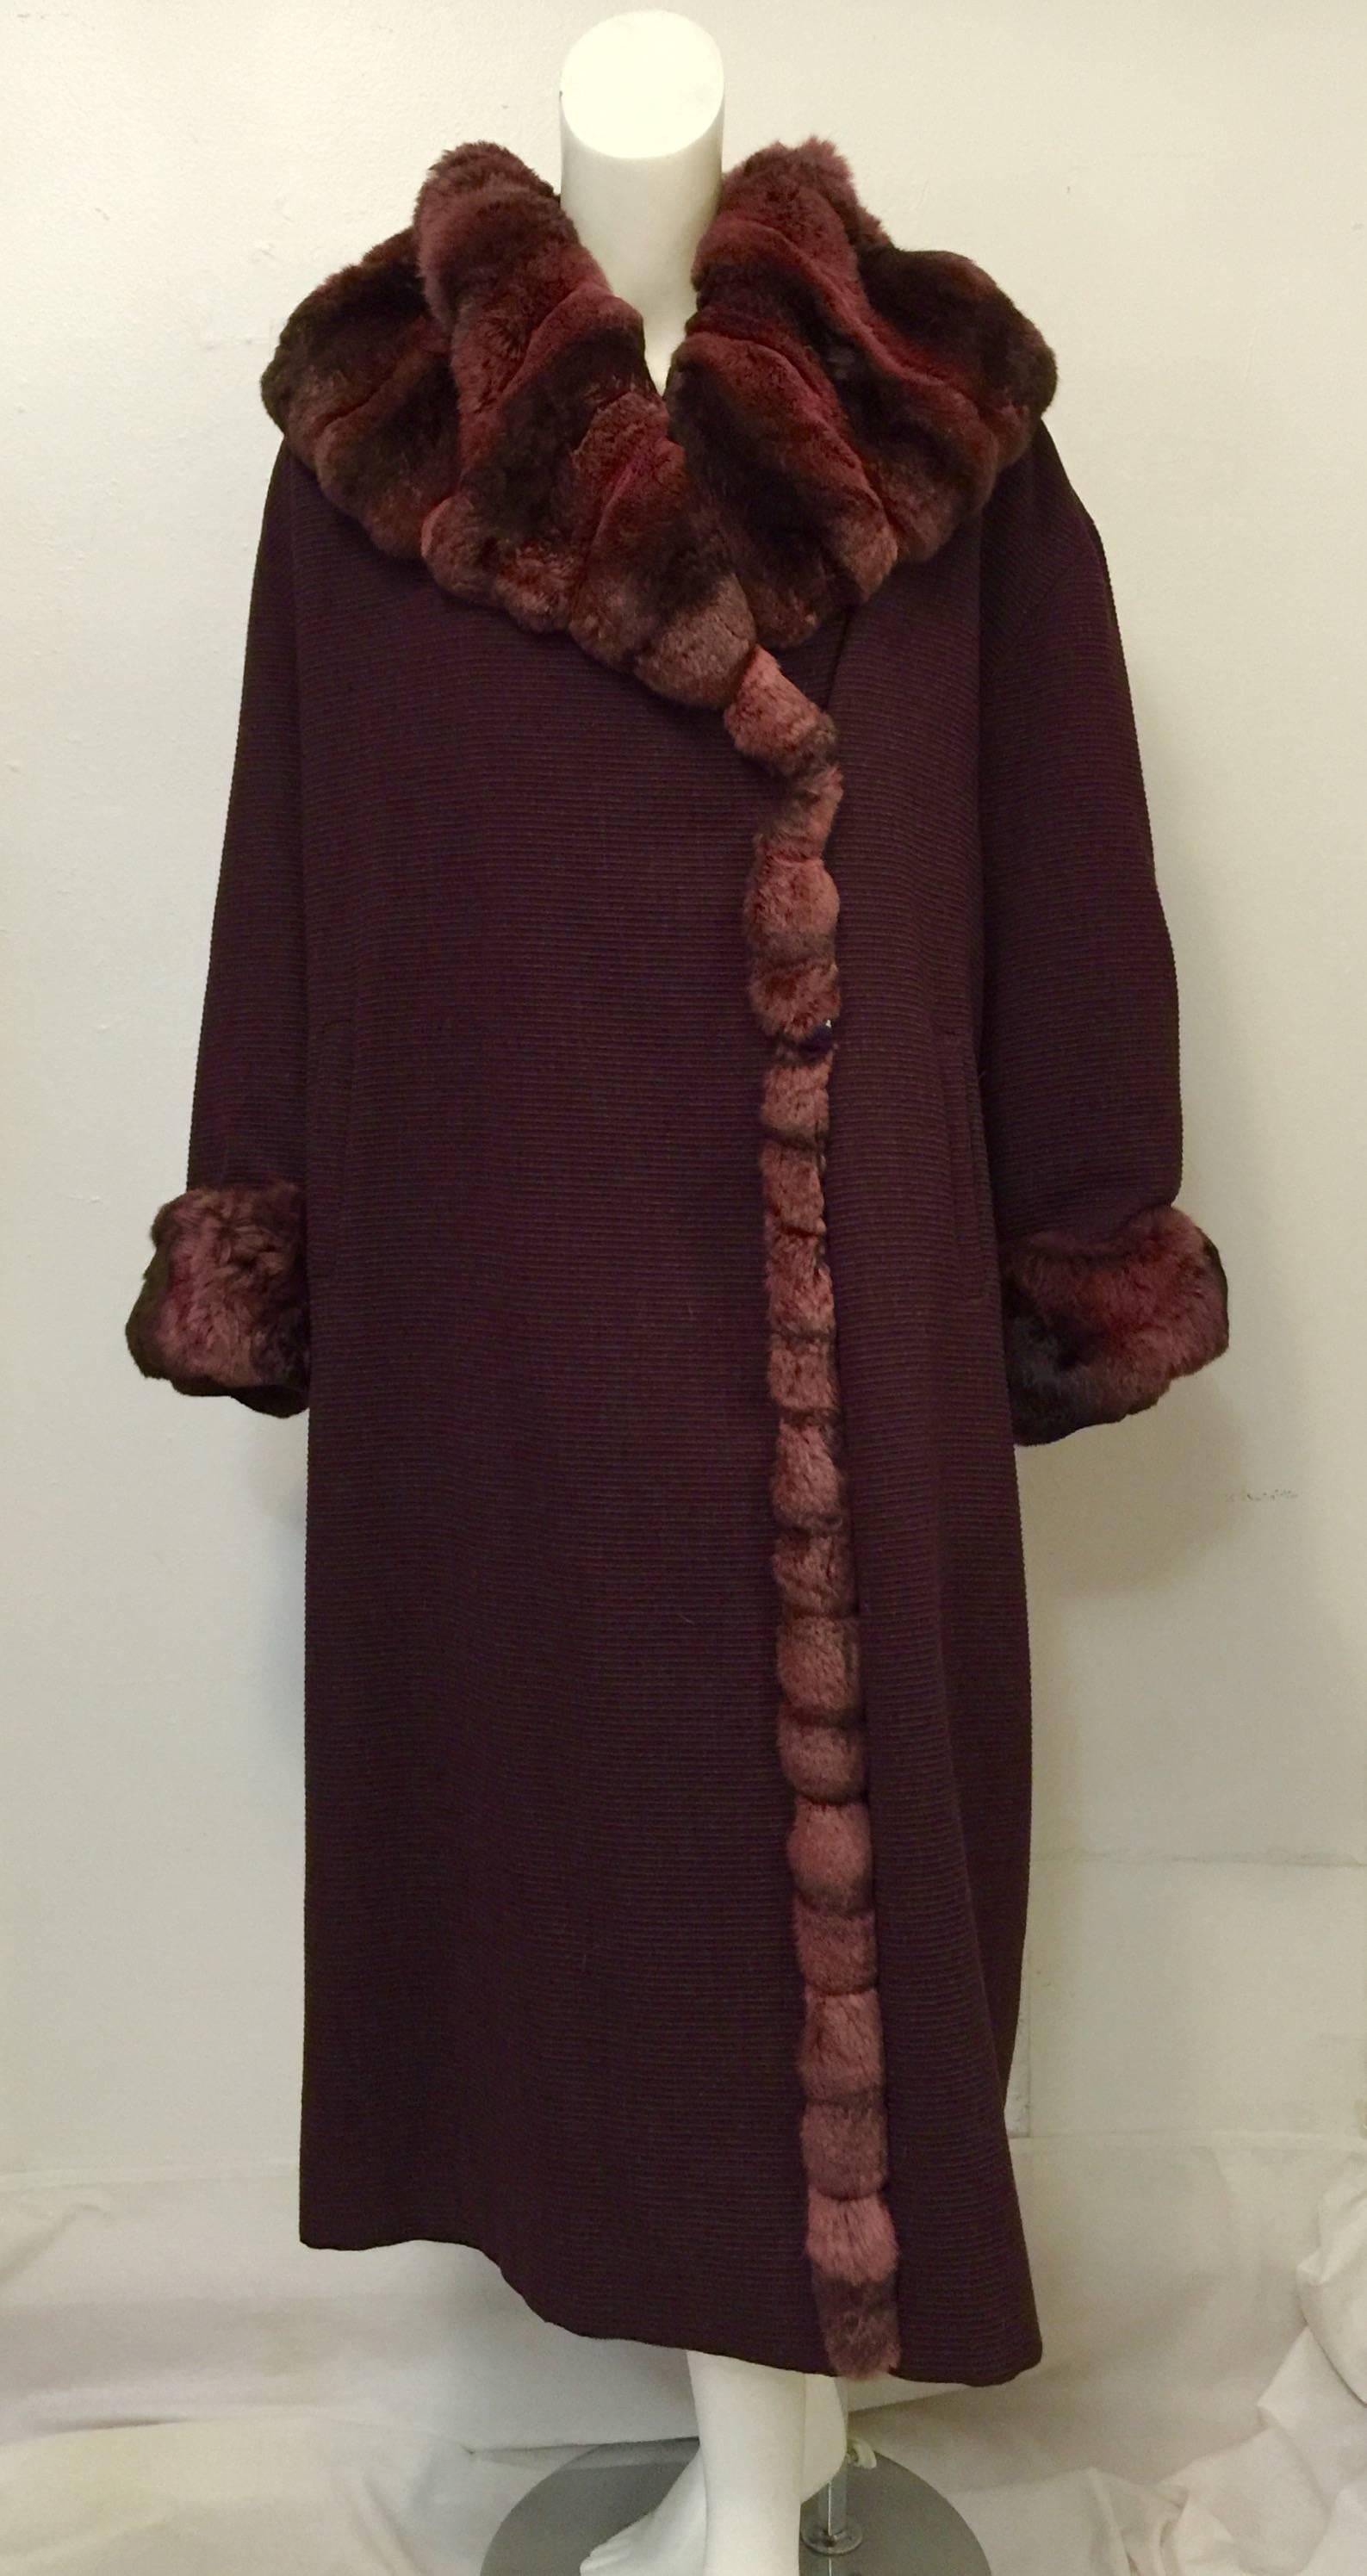 30% OFF!  Aubergine Wool Long Coat With Chinchilla Collar and Cuffs must be seen to be believed.  Luxury defined, this coat's silhouette is reminiscent of the 